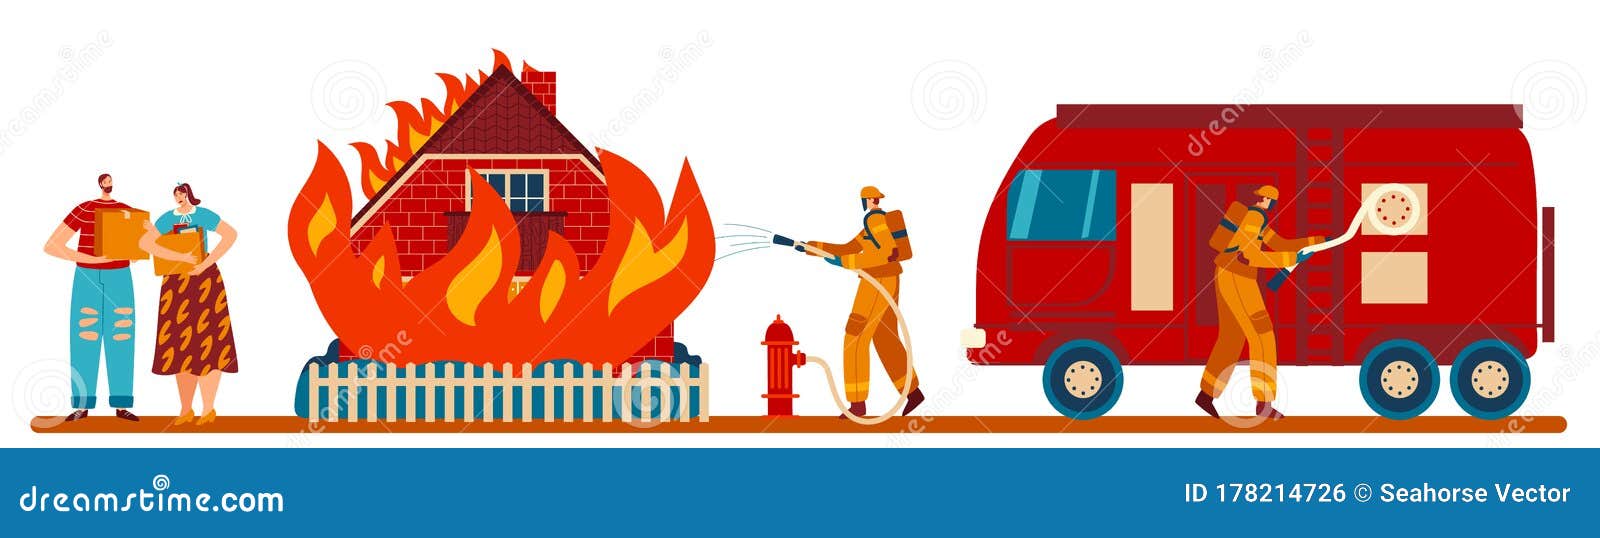 Firefighter Extinguish Fire in Burning House, People Accident Victims,  Vector Illustration Stock Vector - Illustration of character, hydrant:  178214726